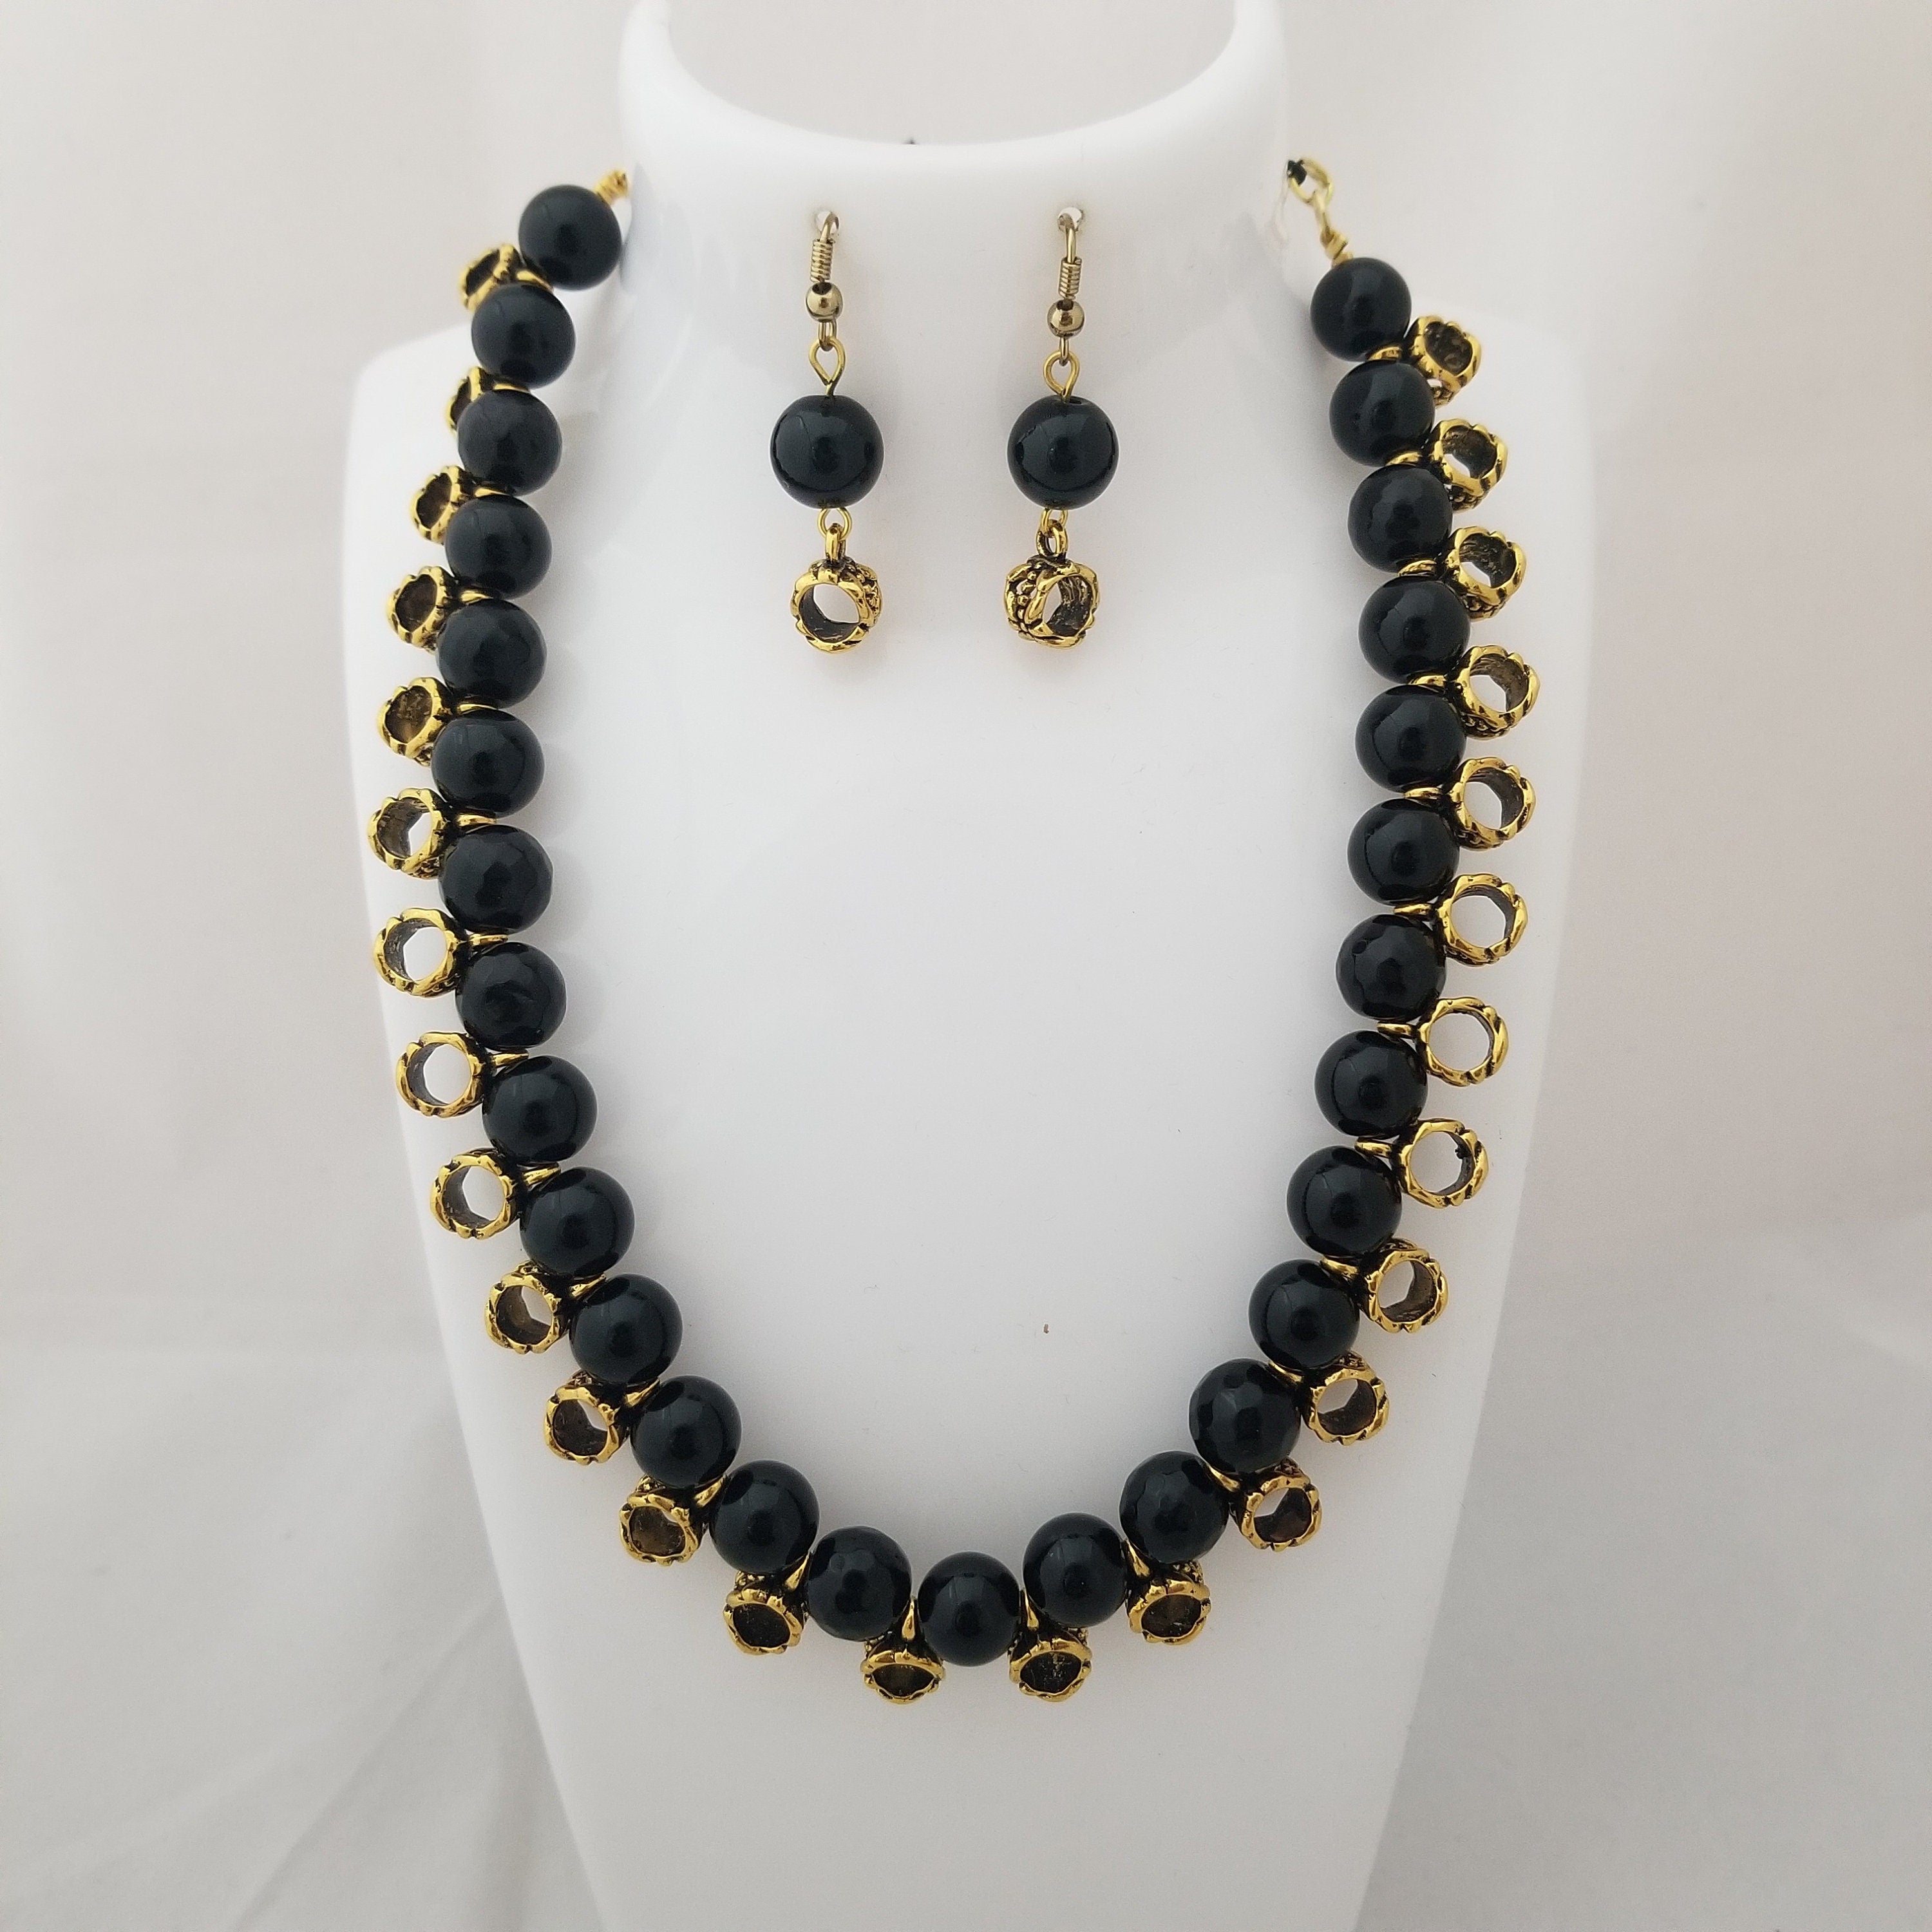 Black bead with Antique bead Necklace